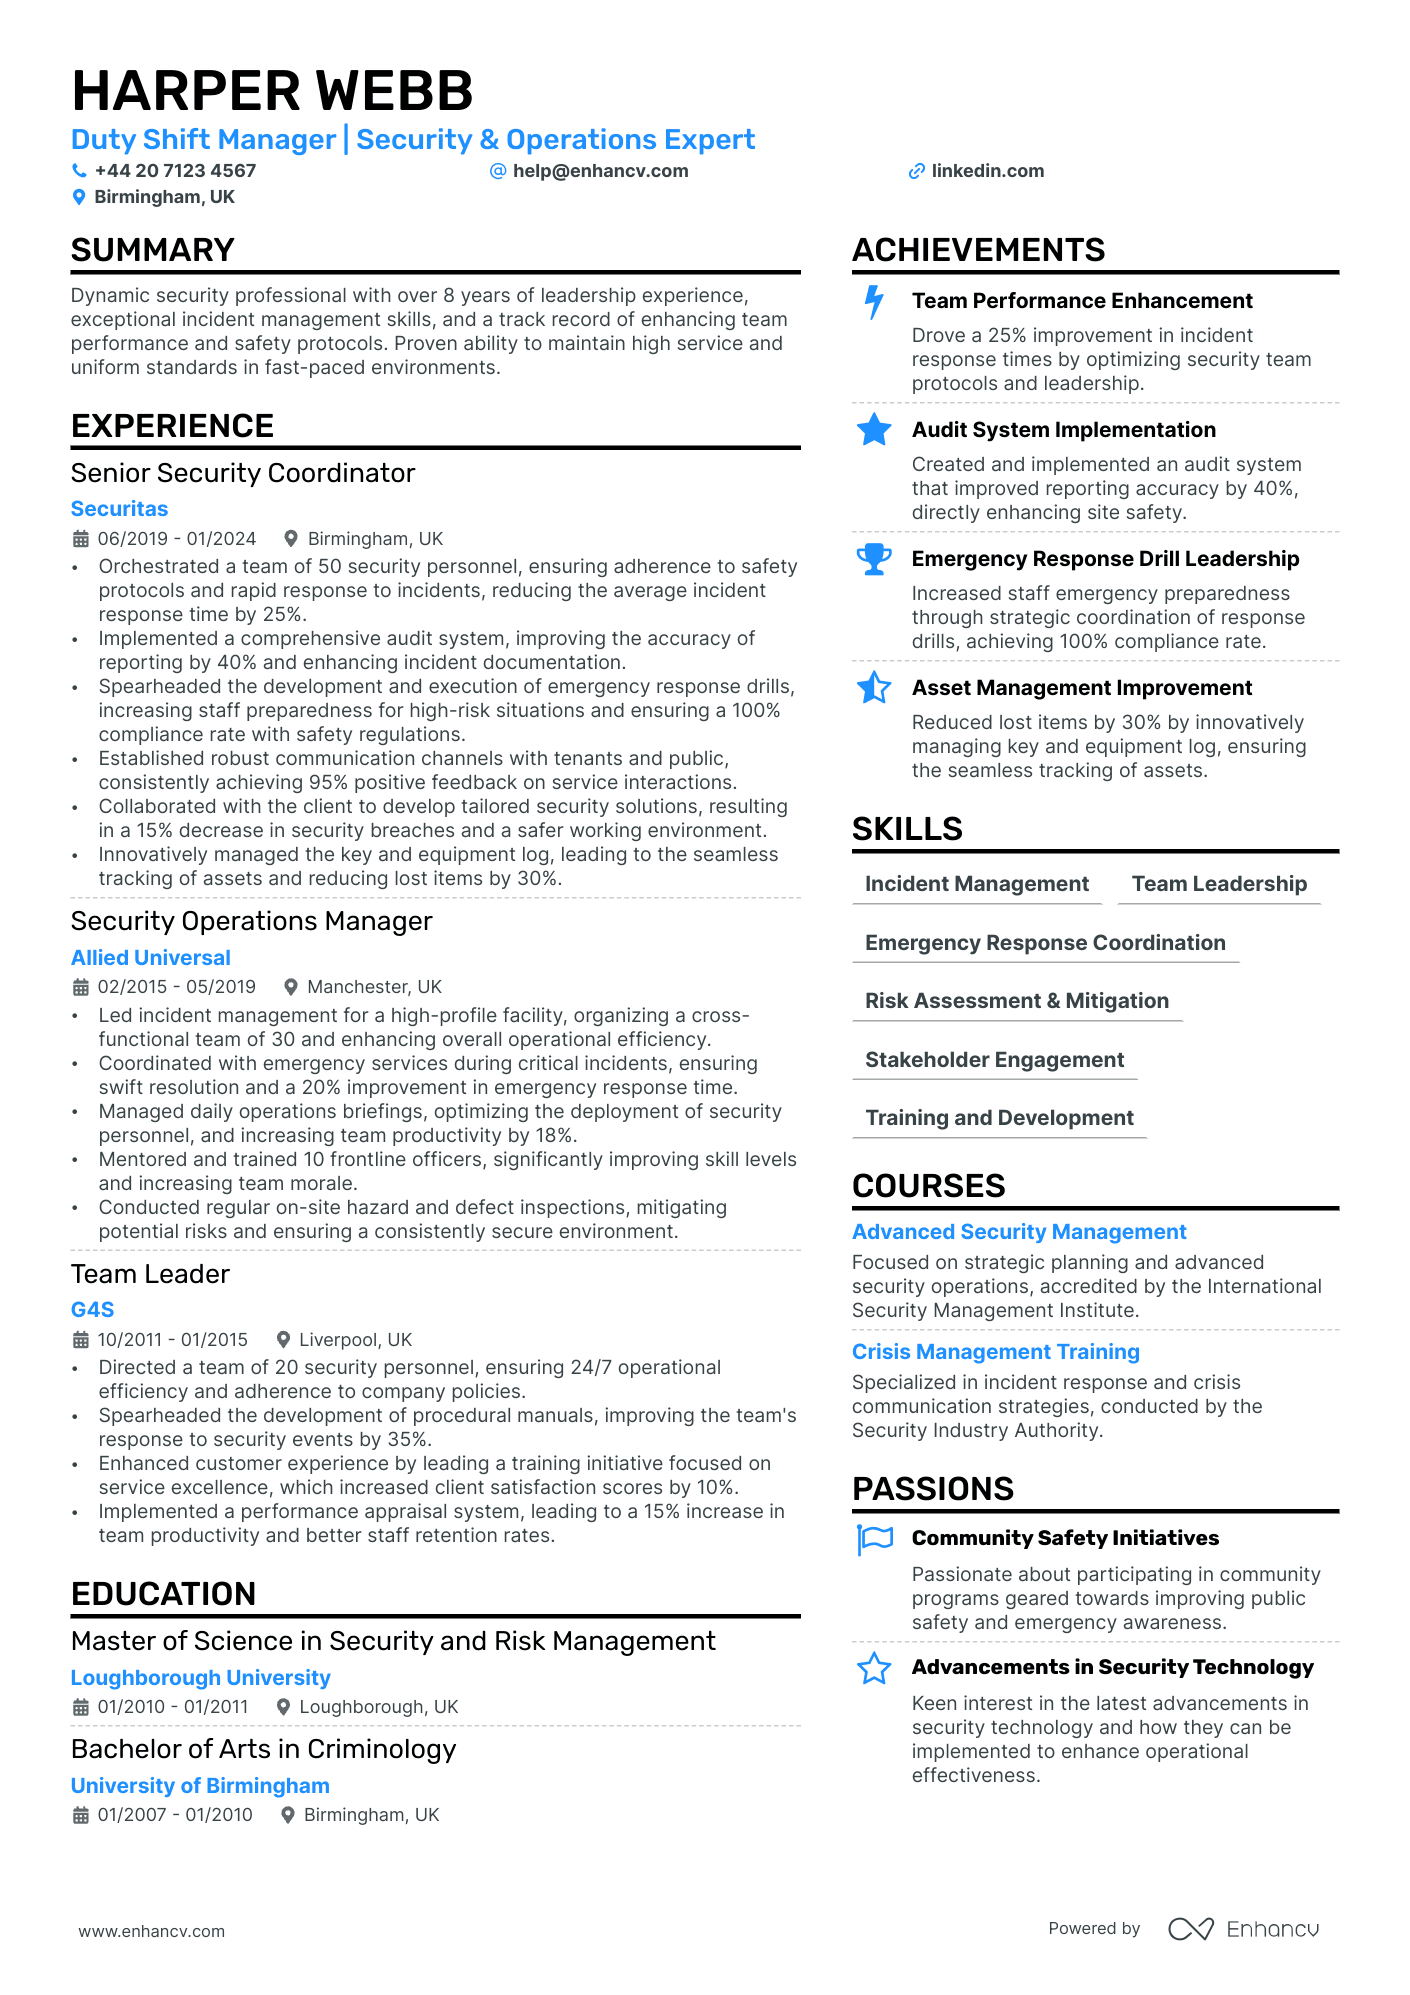 Security Manager cv example